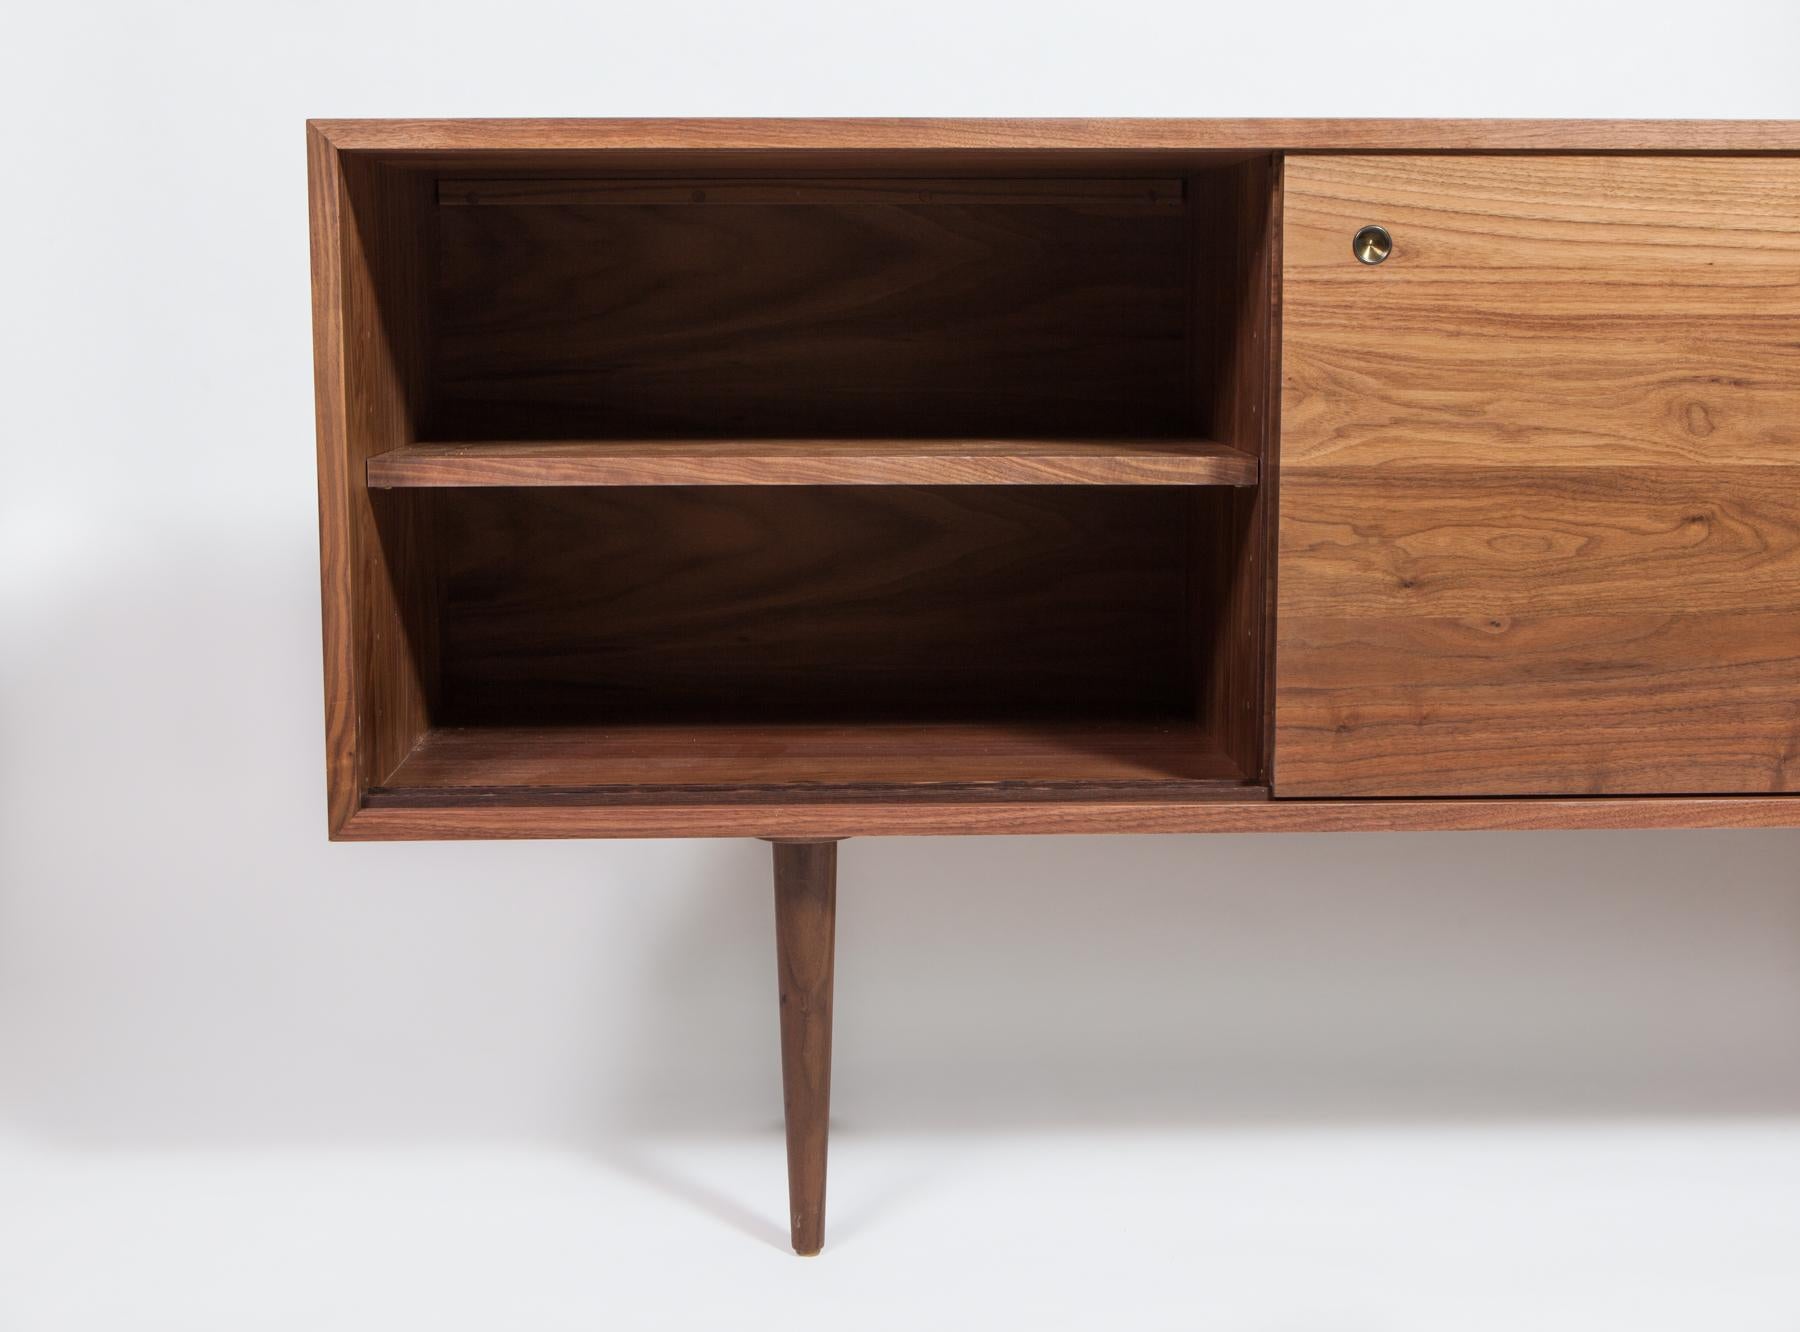 Originally designed by Mel Smilow in 1950 and officially reintroduced by his daughter Judy Smilow in 2013, the solid walnut Credenza with matching doors has a beautifully finished front and back. The focal point of any Mid-Century Modern home, its